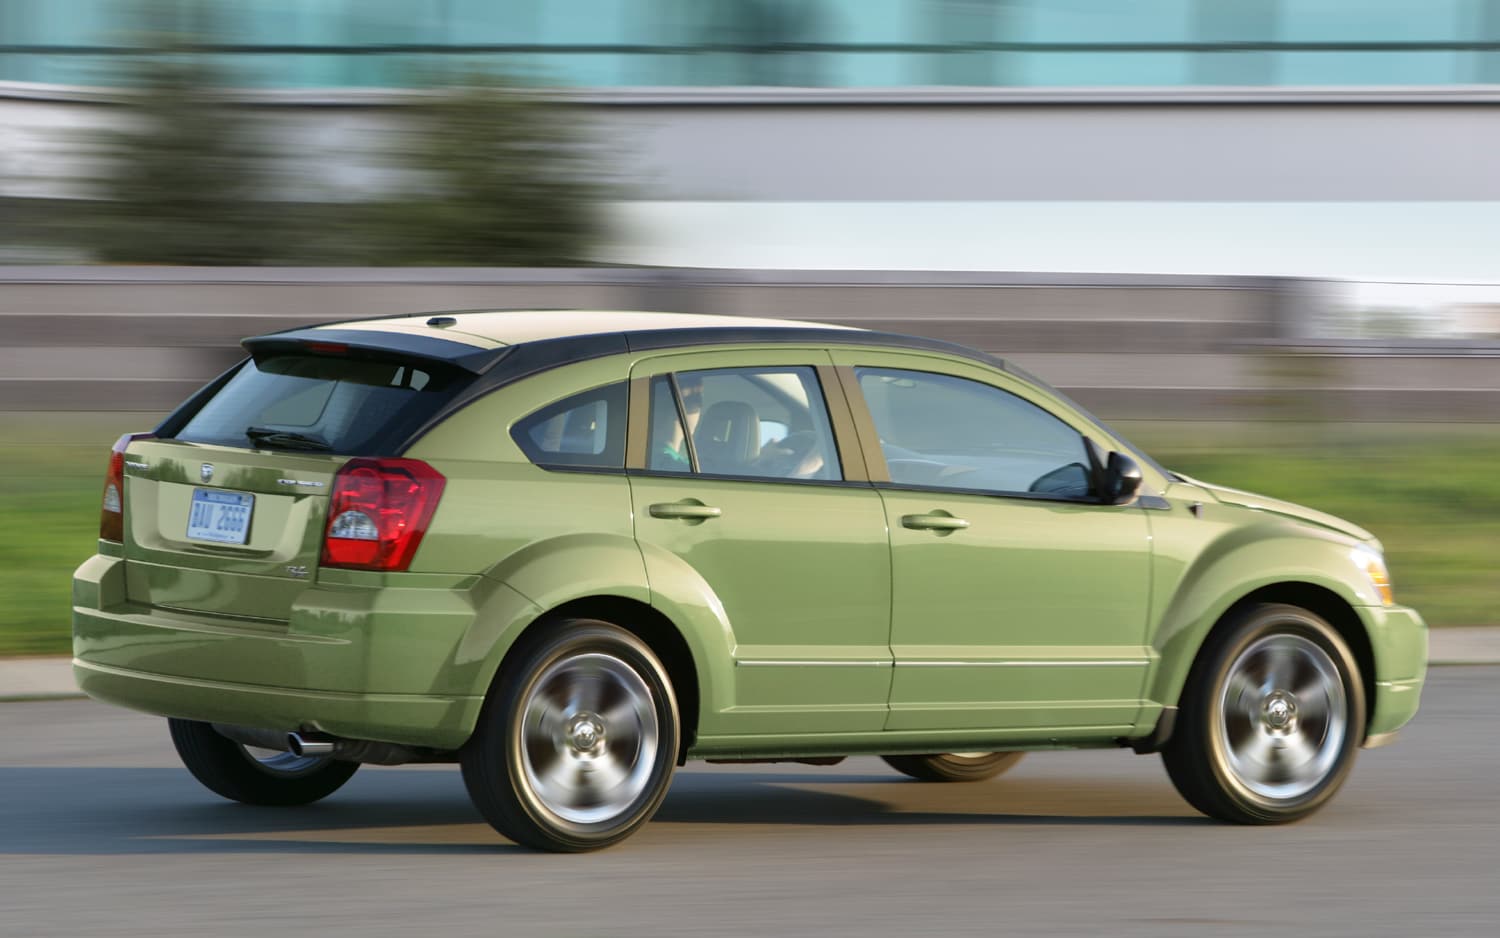 End of an Era: Last Dodge Caliber Built in Illinois